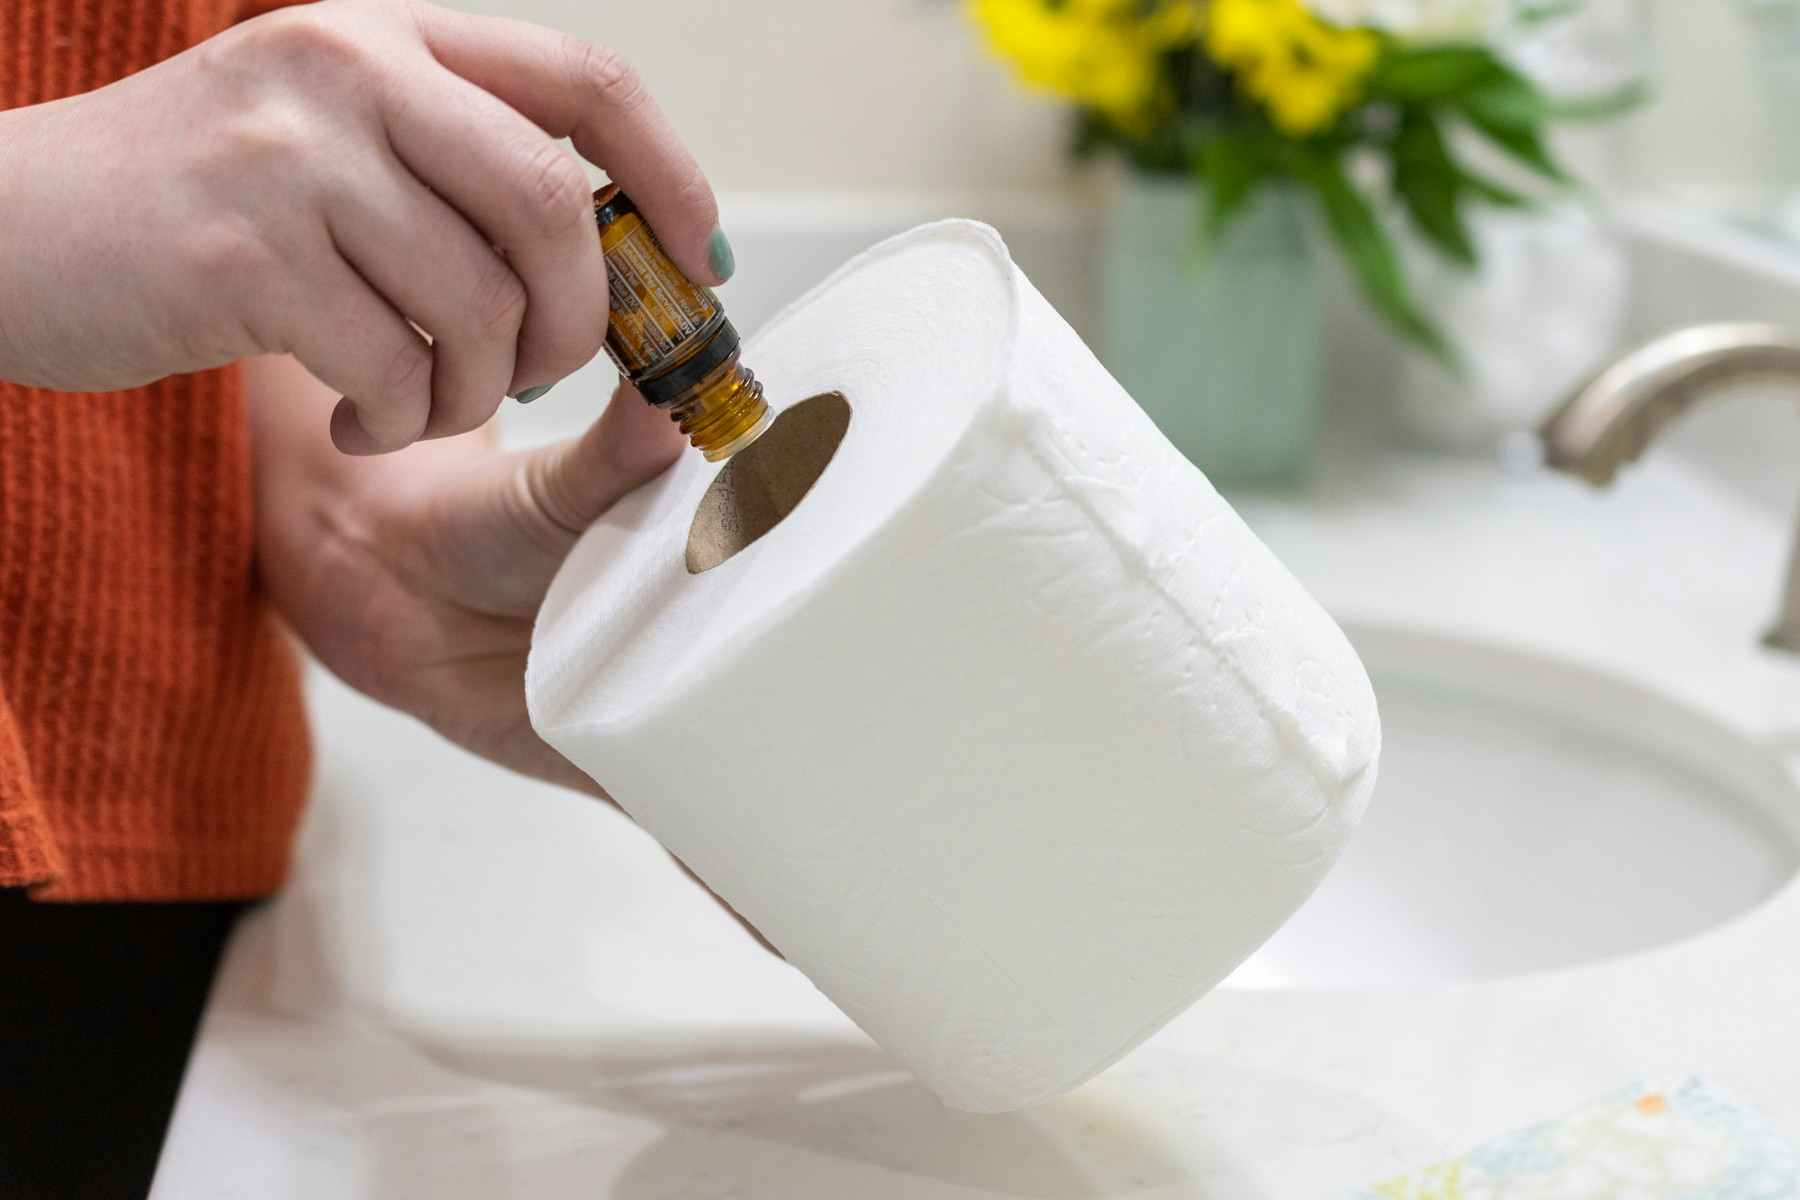 A woman adding drops of essential oil to the tube of a toilet paper roll